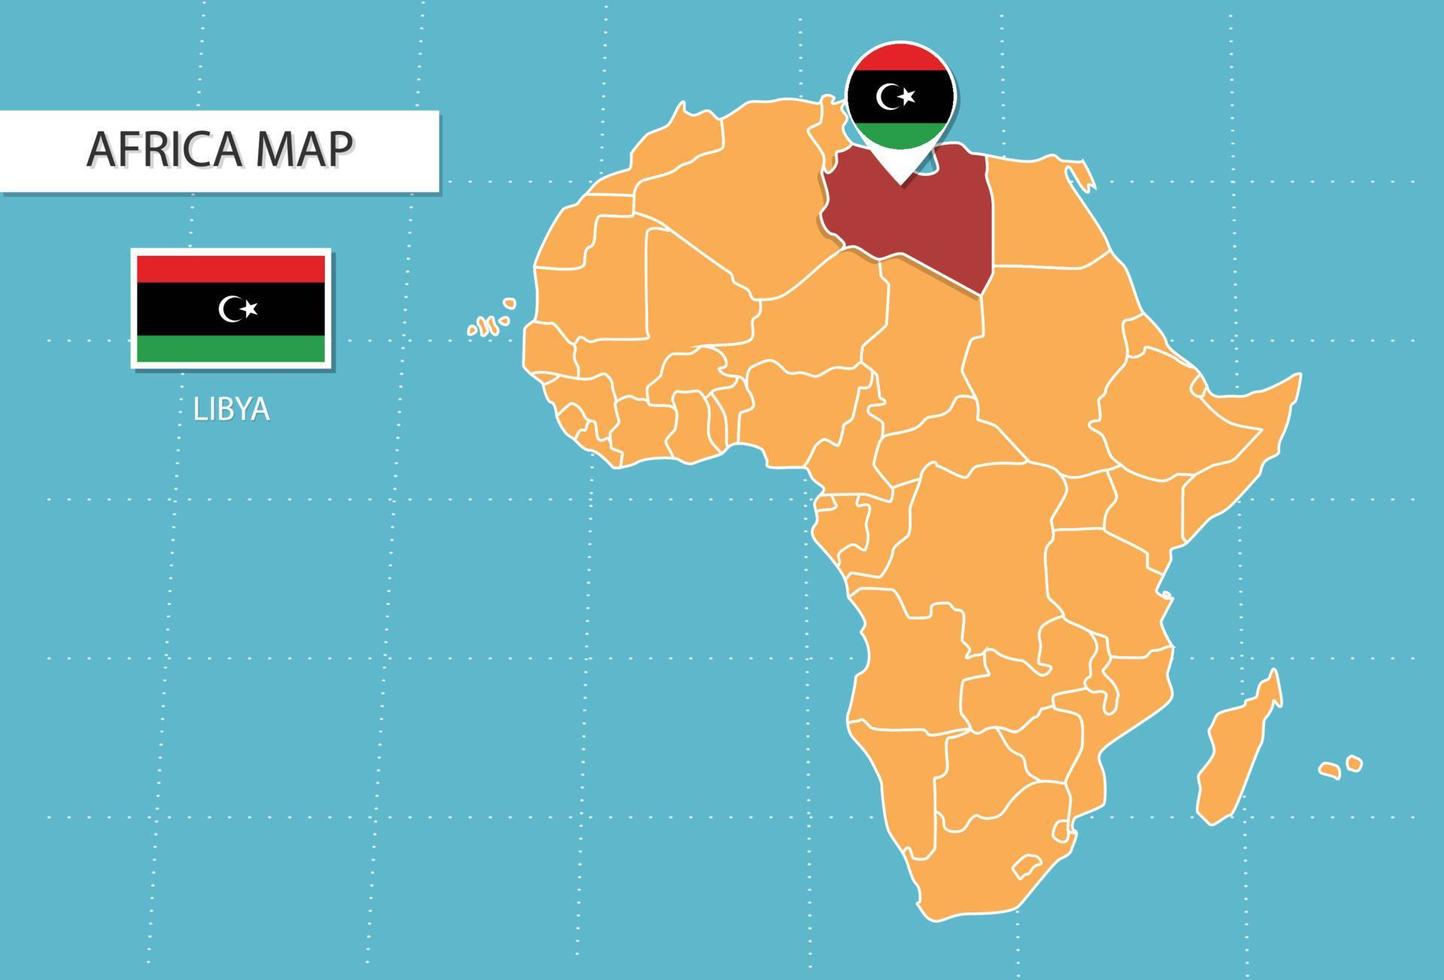 Libya map in Africa, icons showing Libya location and flags. vector